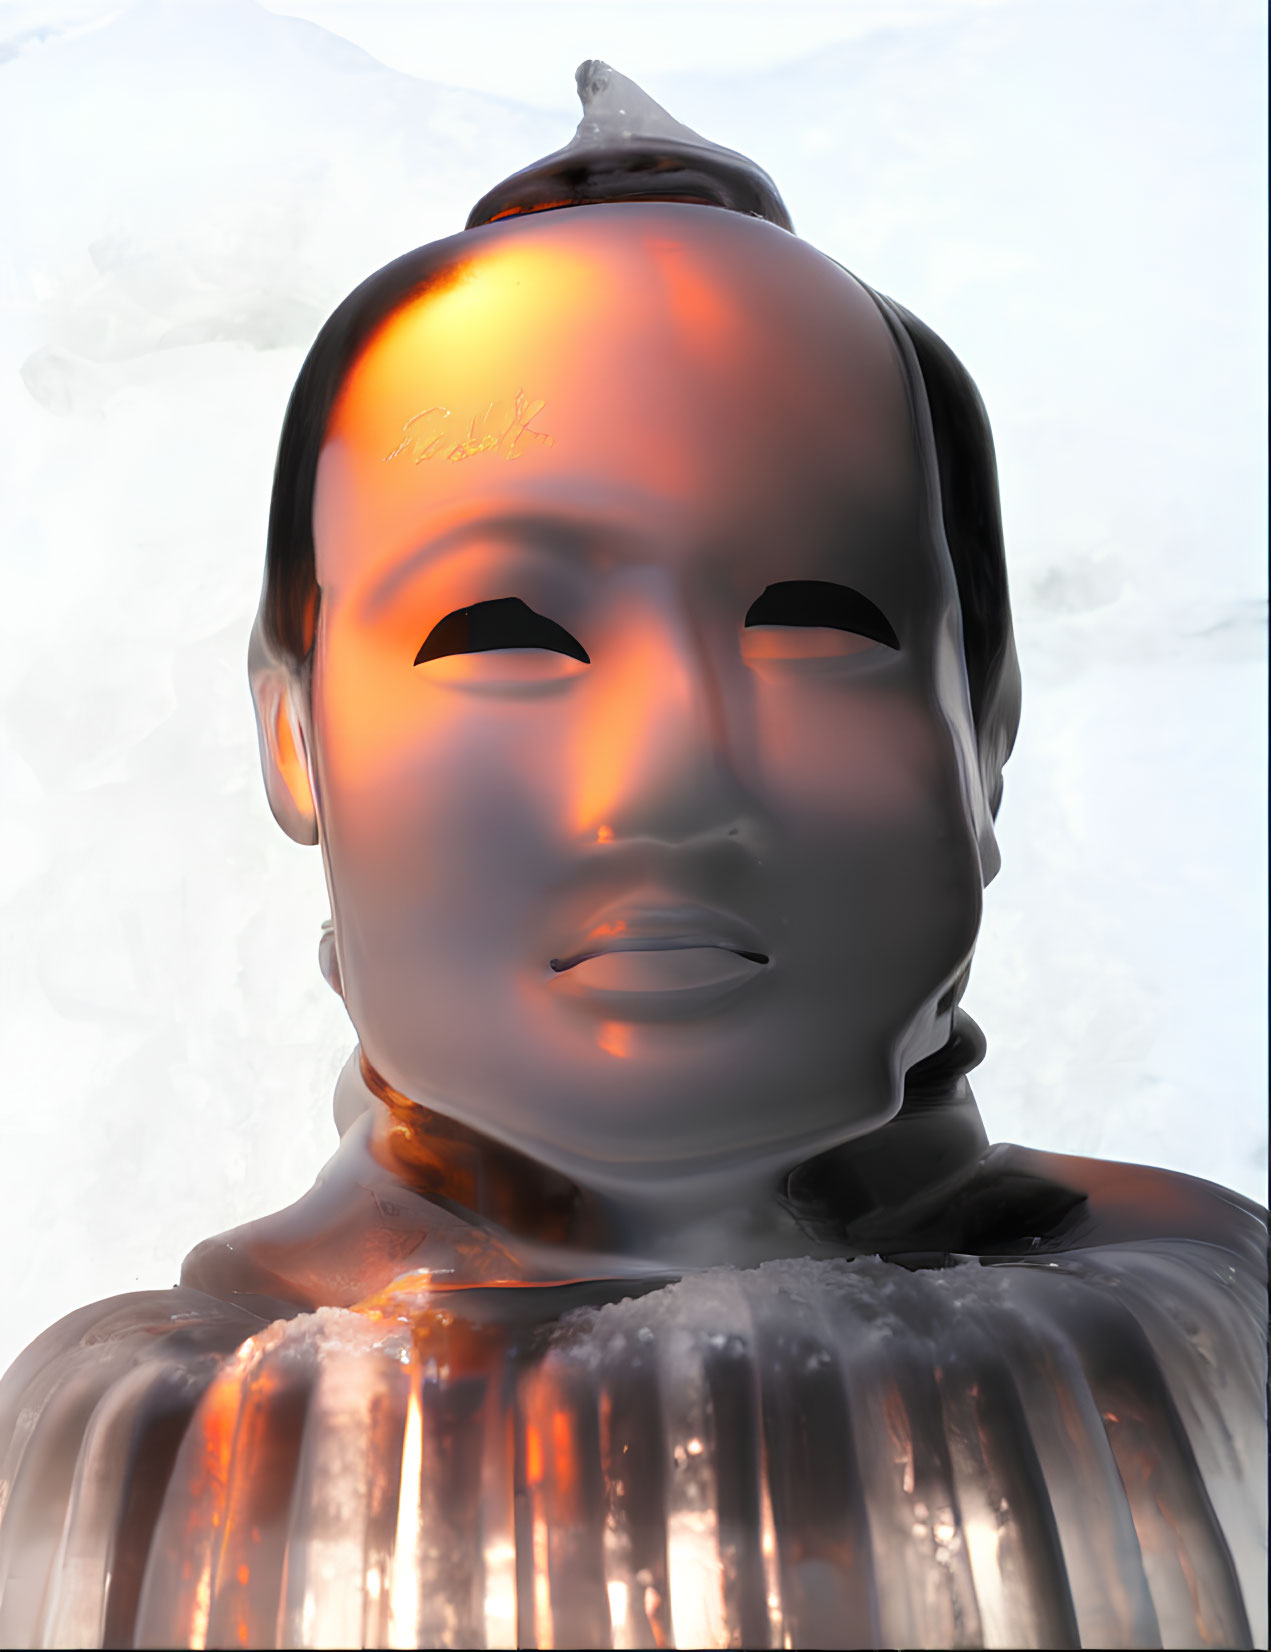 Translucent human head sculpture on icy background with warm amber glow